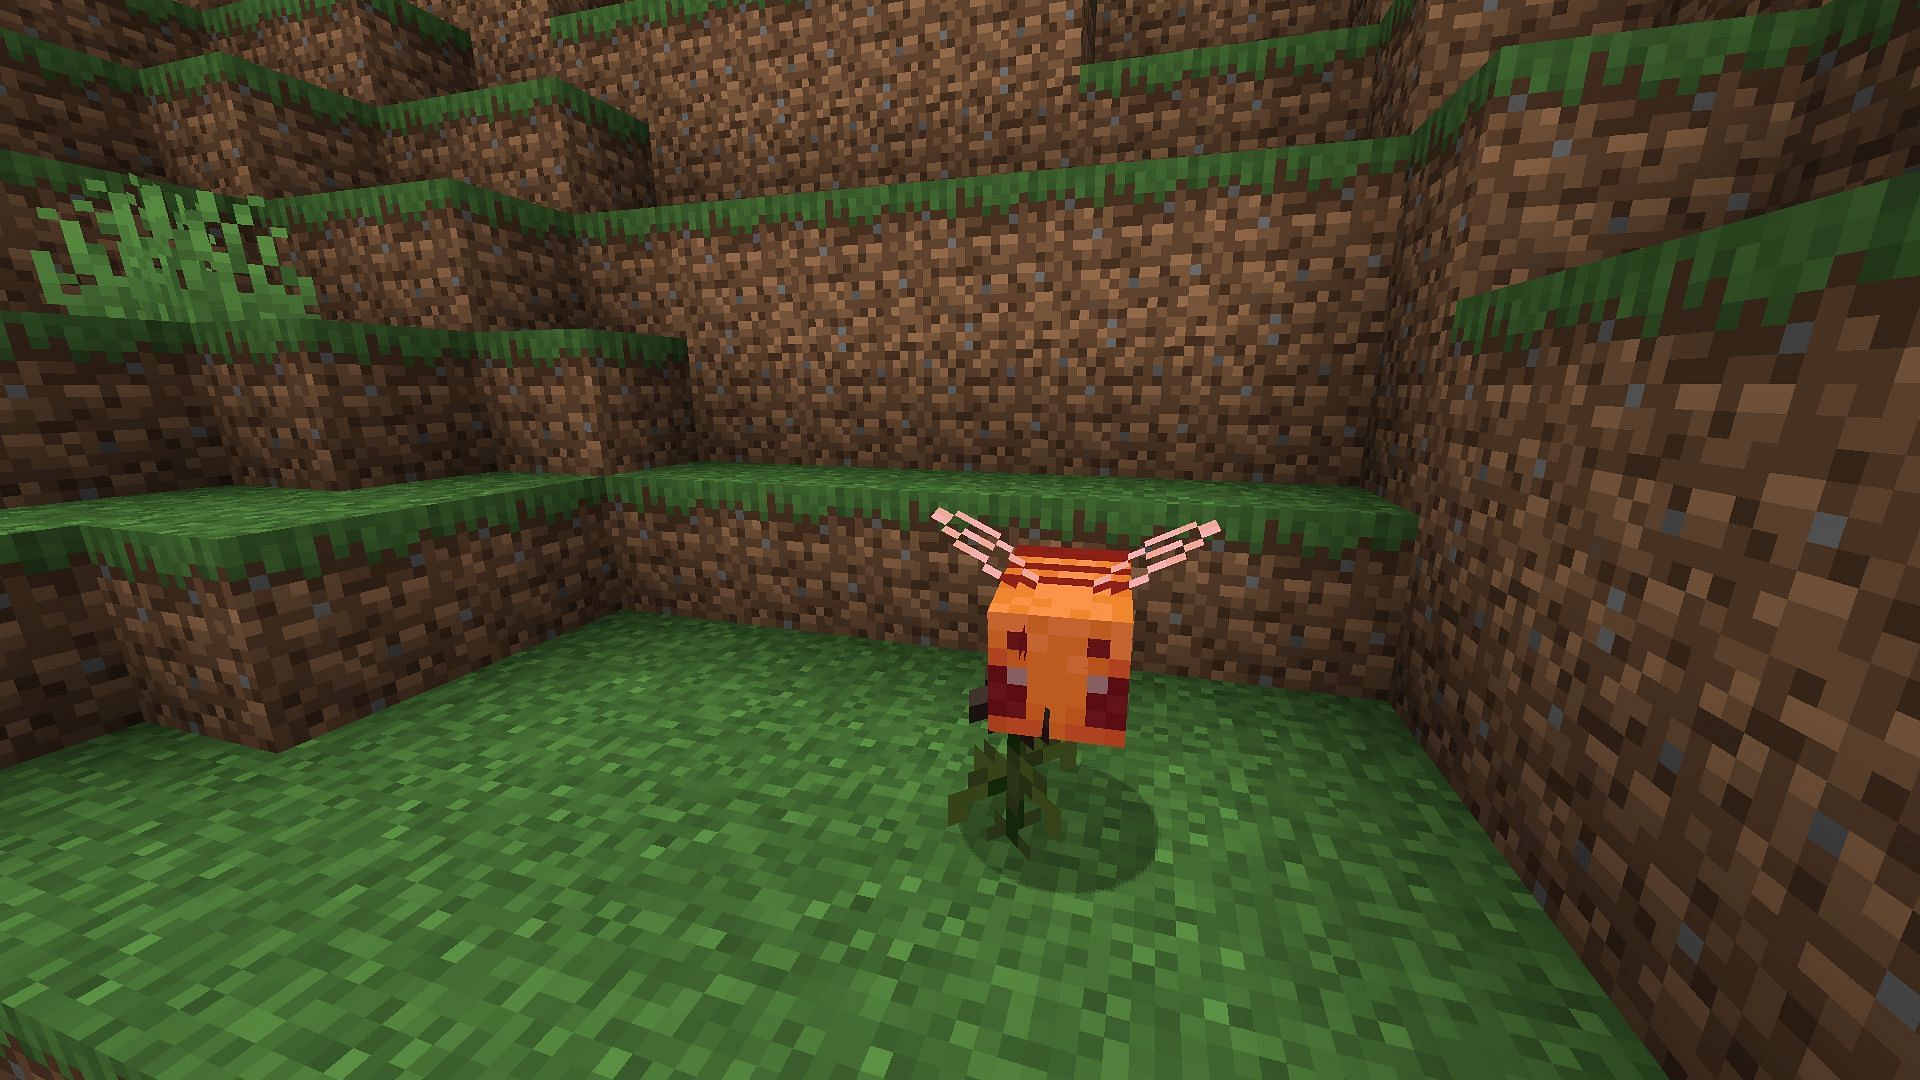 Bees take damage from wither roses but continue to pollinate them in Minecraft (Image via Mojang)